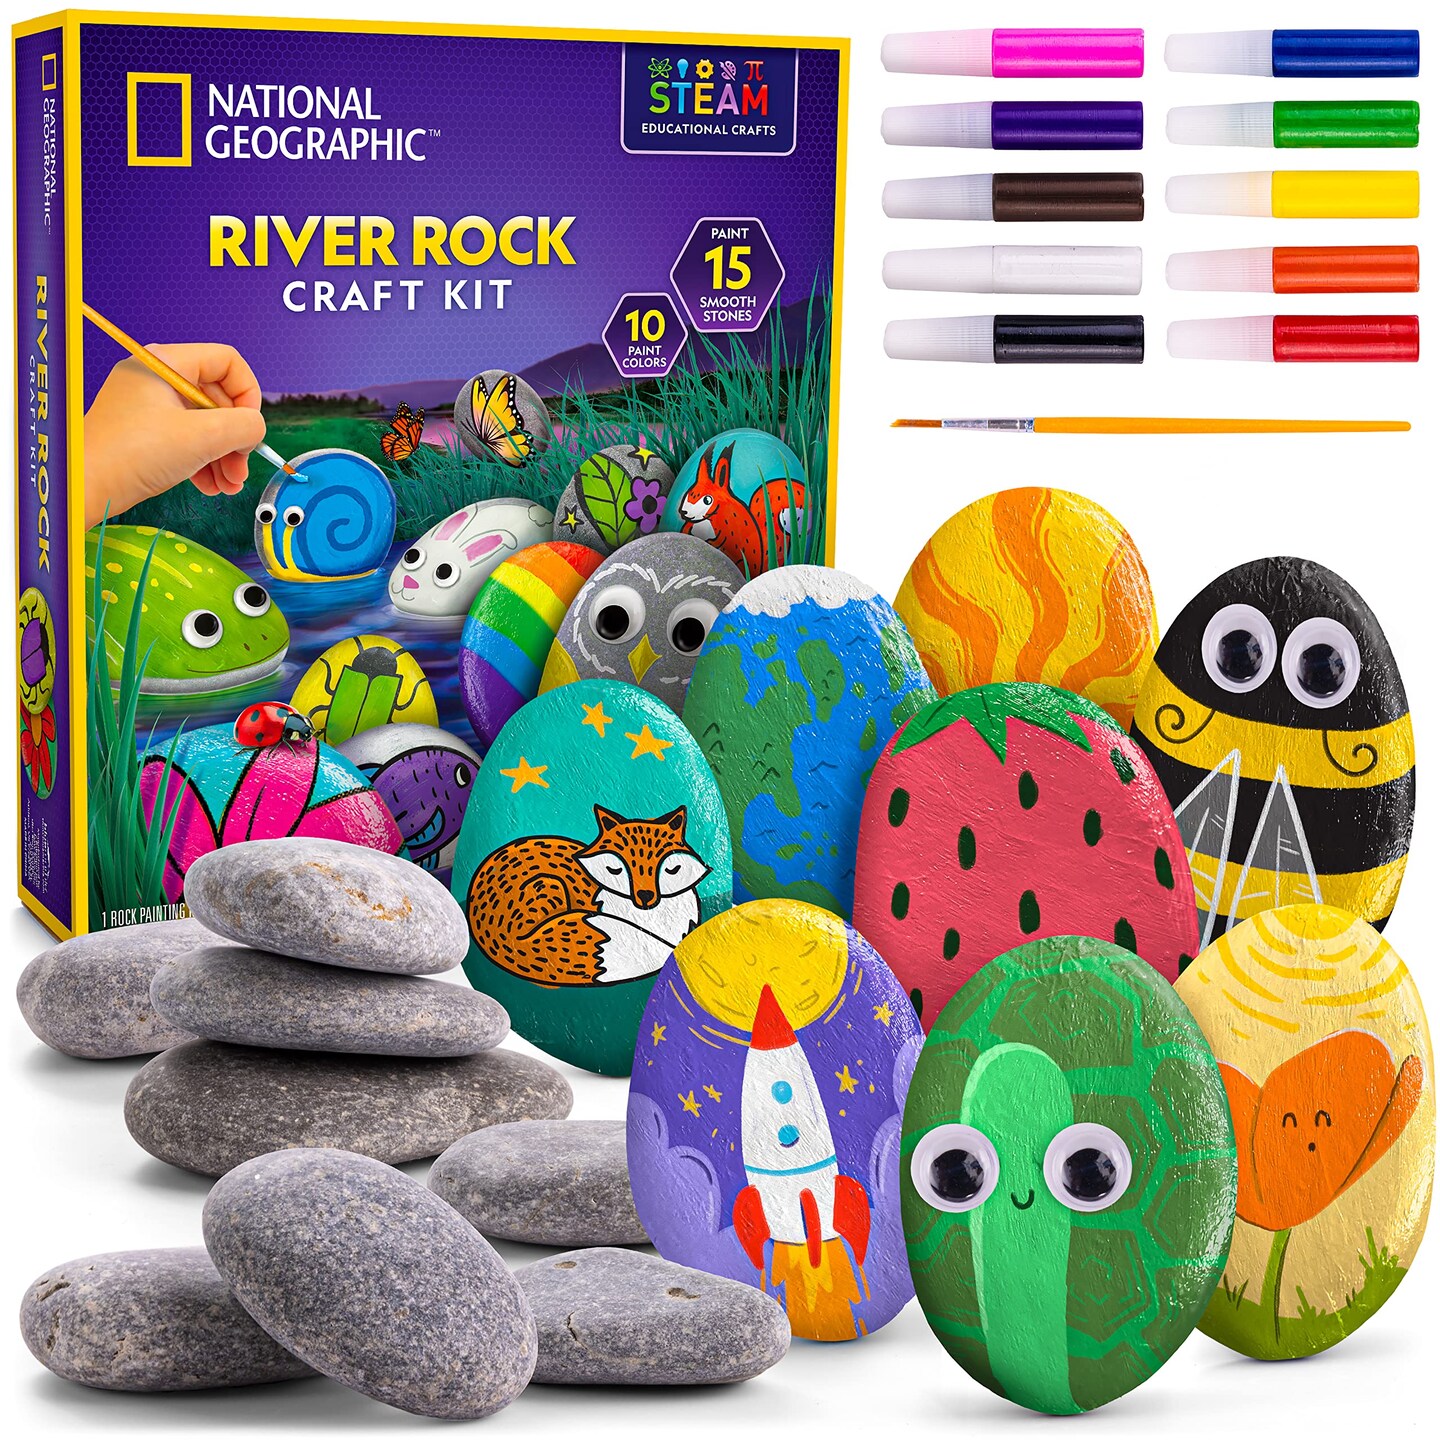 NATIONAL GEOGRAPHIC Rock Painting Kit - Arts and Crafts Kit for Kids, Paint &#x26; Decorate 15 River Rocks with 10 Paint Colors &#x26; More Art Supplies, Outdoor Toys for Girls and Boys (Amazon Exclusive)